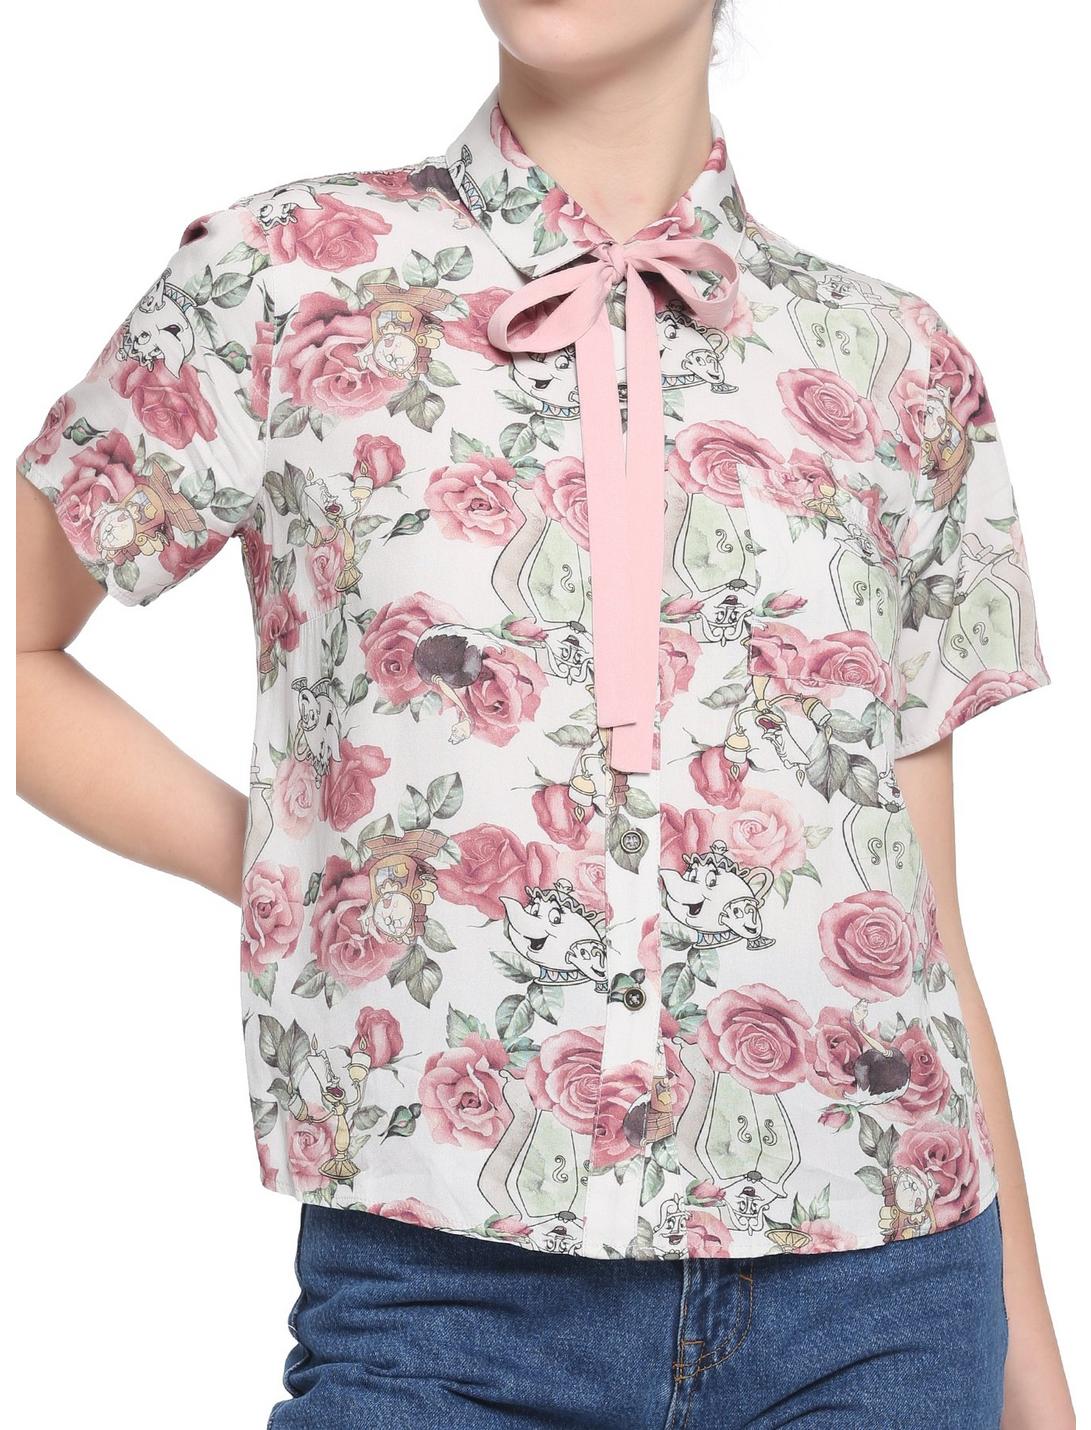 Disney Beauty & The Beast Rose Girls Woven Button-Up, MULTI, hi-res